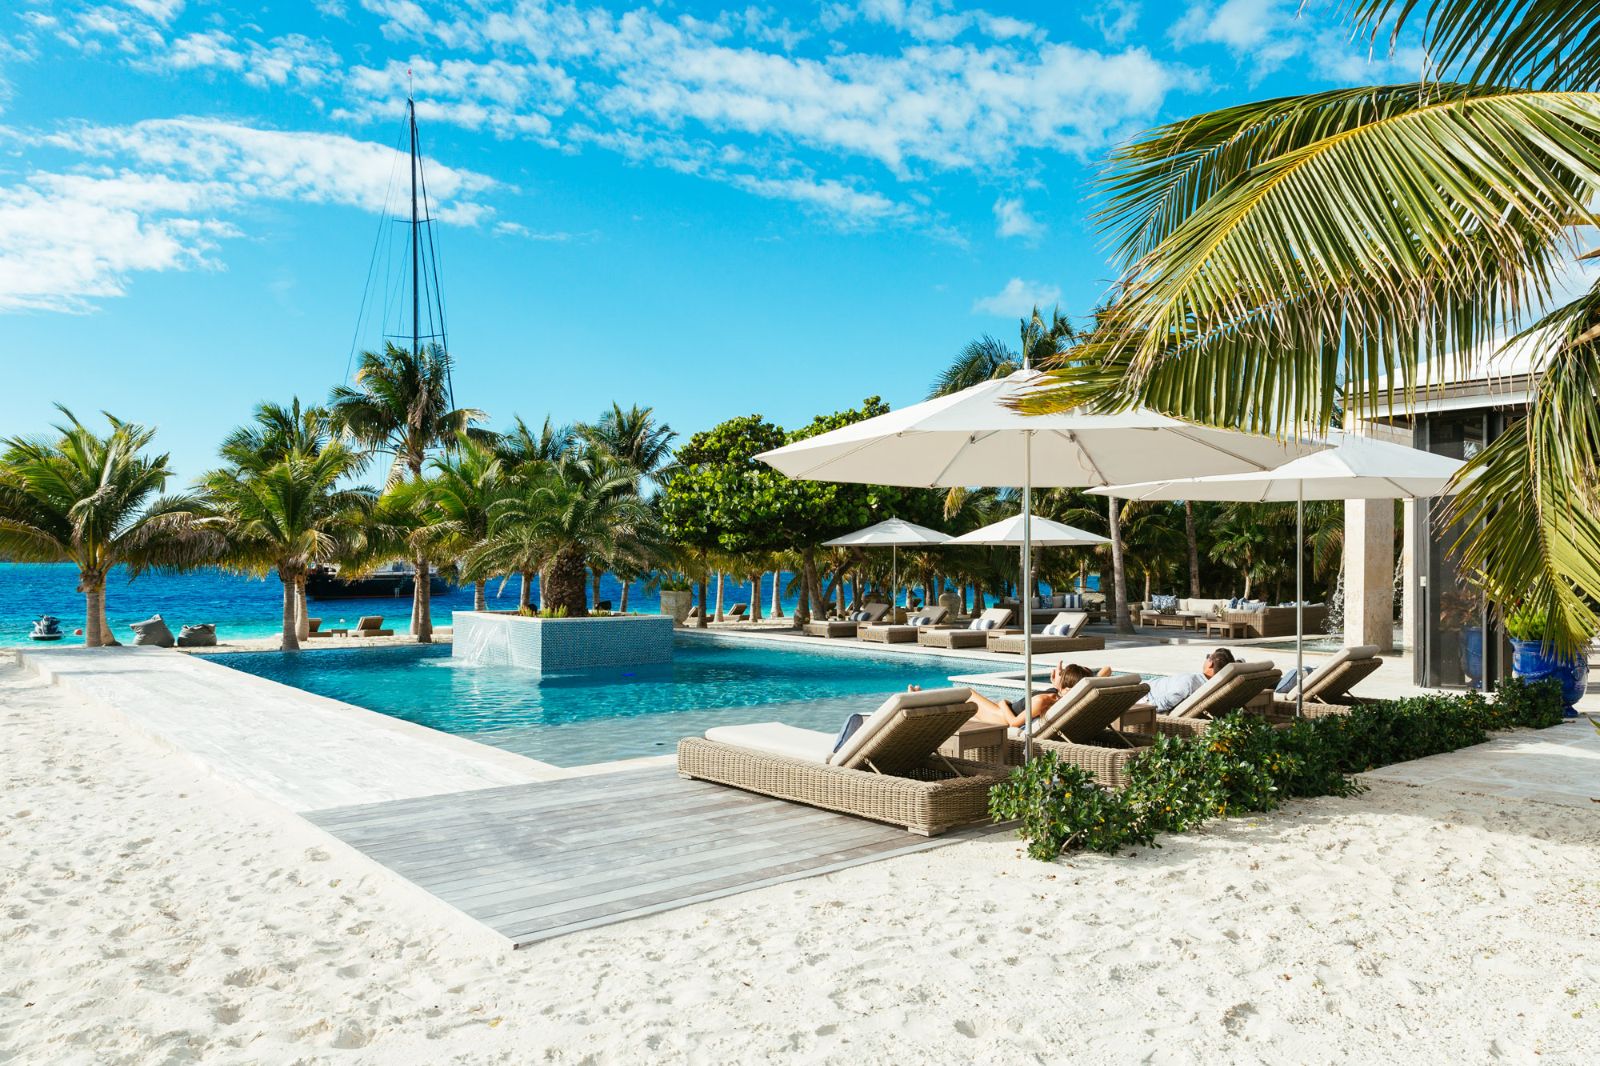 Beach Club at Over Yonder Cay in the Bahamas